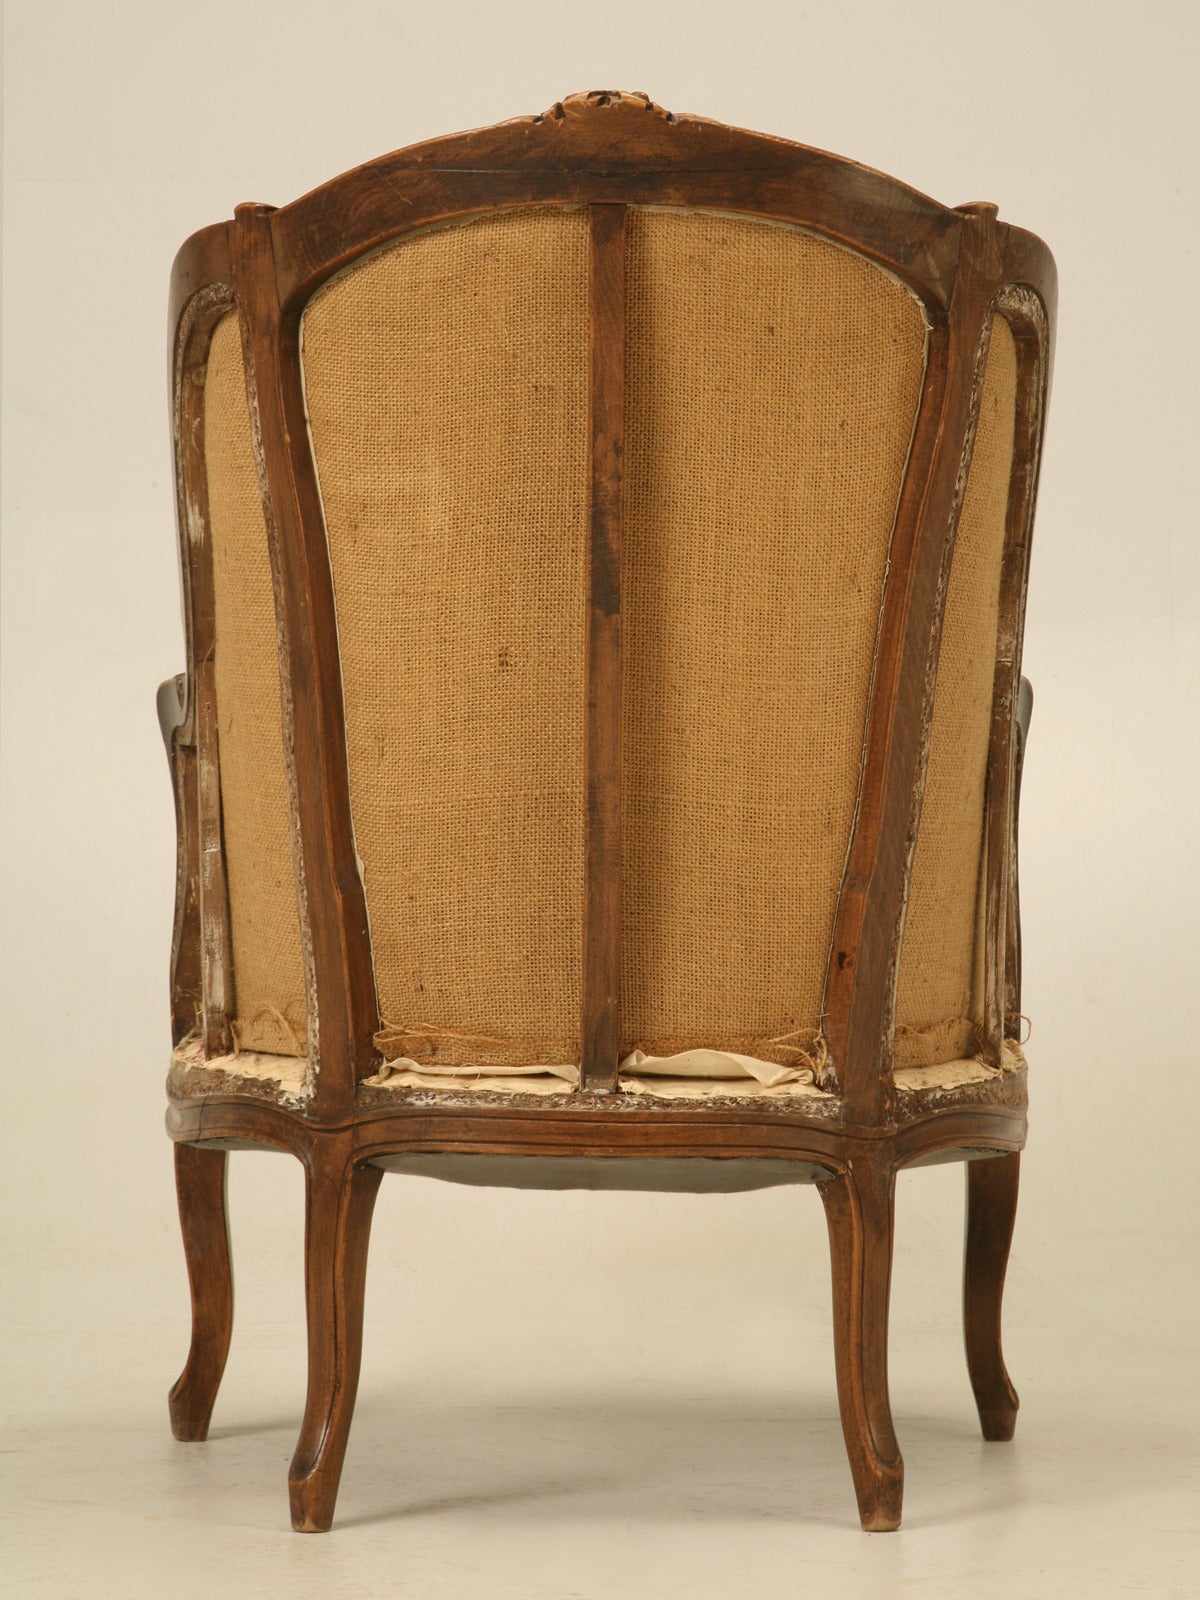 Antique French Hand-Carved Walnut Louis XV Style Chair, Down Cushion circa 1880s For Sale 3